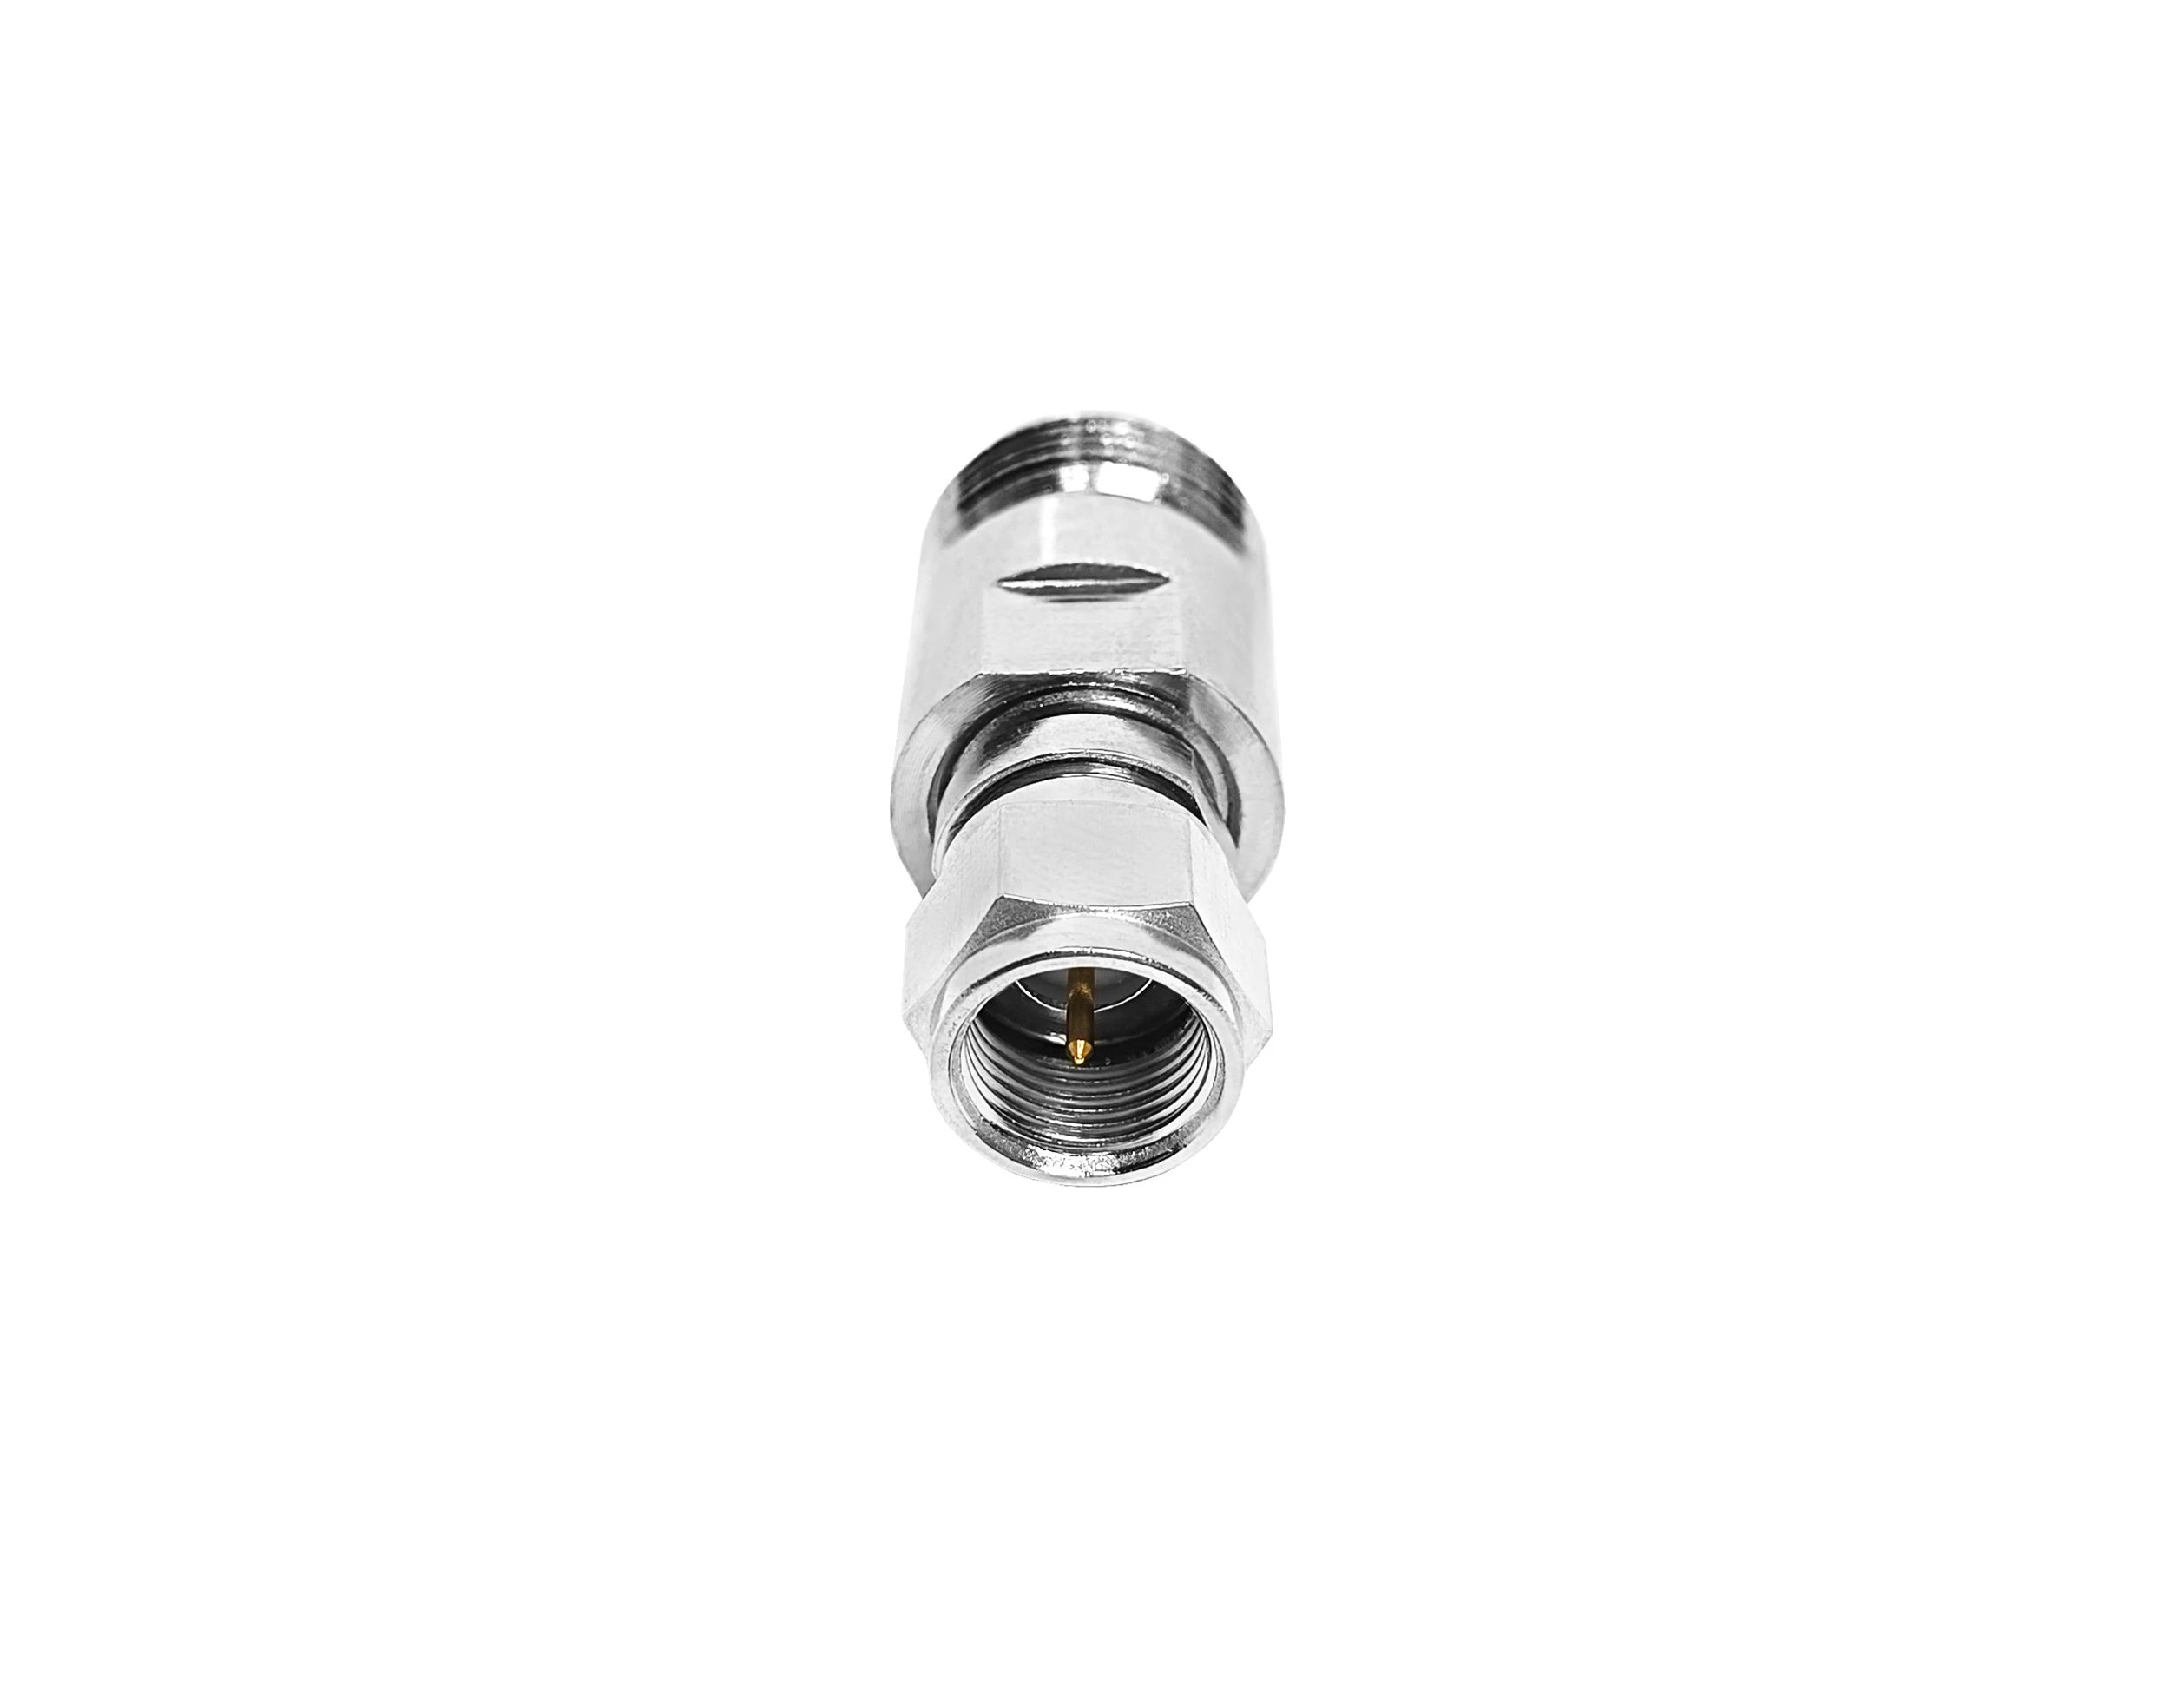 RF Cable Connector Adapter N Female Jack to F Male Plug Adapter factory